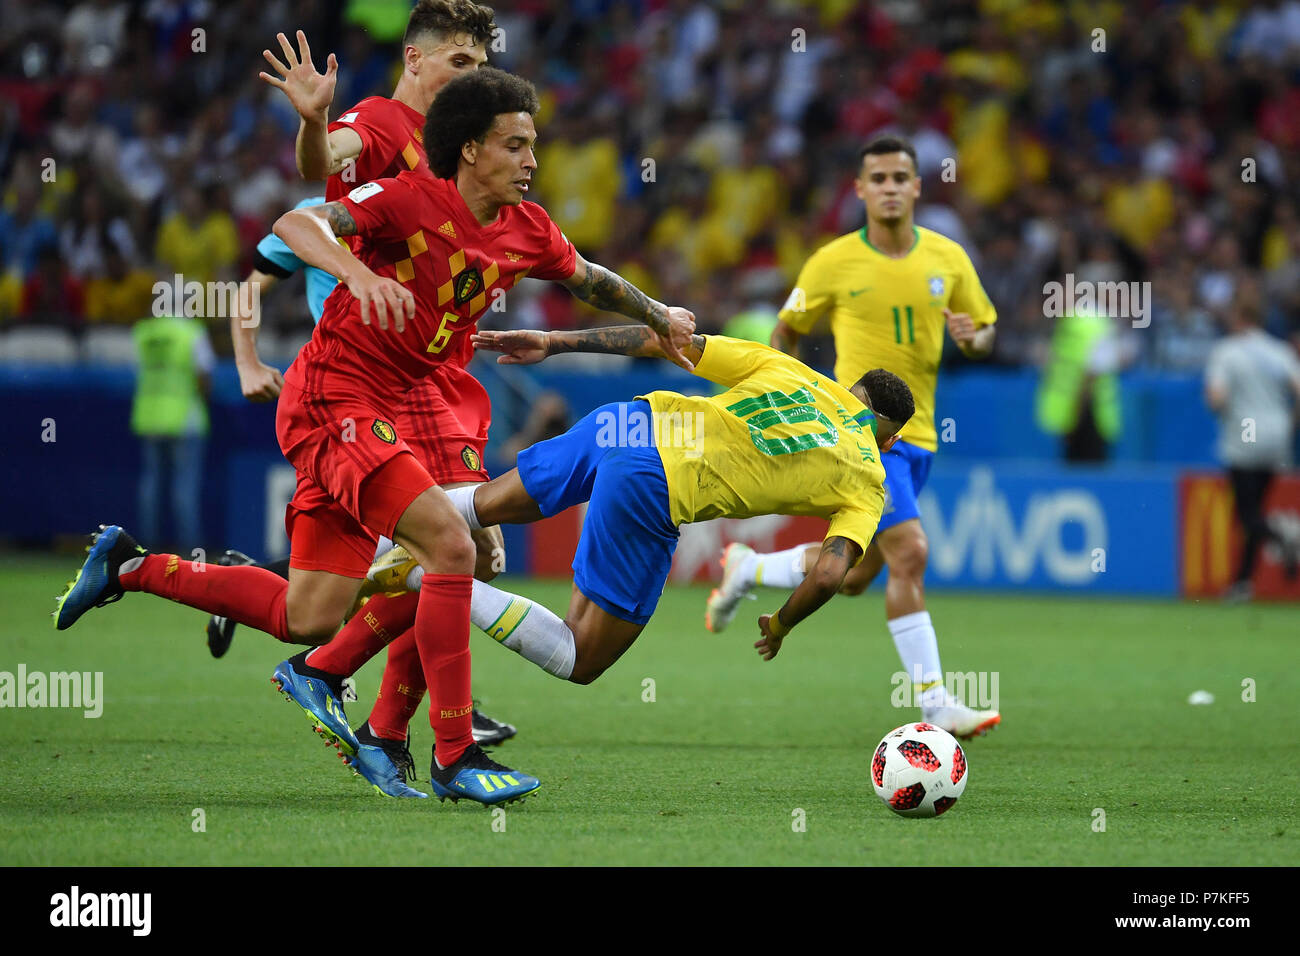 Kazan, Russia. 6th July 2018. Axel WITSEL (BEL), Action, duels versus NEYMAR (BRA), Foul, Brazil (BRA) - Belgium (BEL) 1-2, Quarter-Finals, Round of Eight, Game 58 on 06/07/2018 in Kazan, Kazan Arena. Football World Cup 2018 in Russia from 14.06. - 15.07.2018. | usage worldwide Credit: dpa picture alliance/Alamy Live News Stock Photo